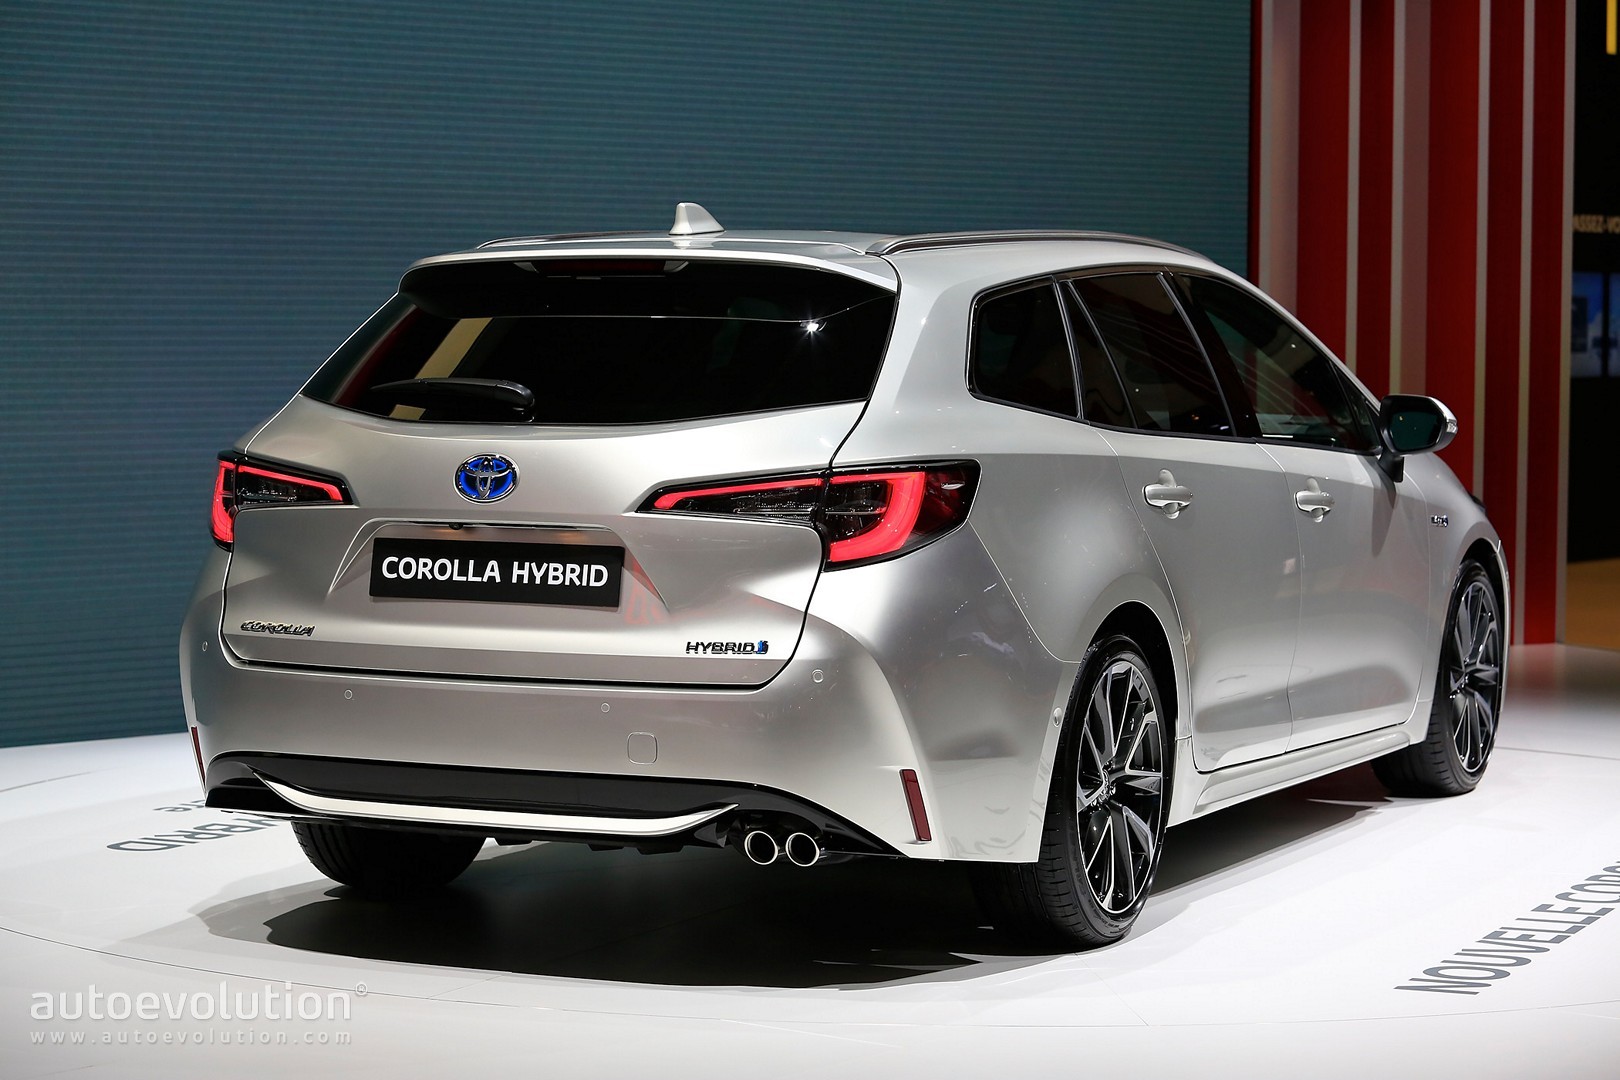 Toyota Corolla Hybrid Wagon Has Giant Trunk and Even Bigger Tablet in ...